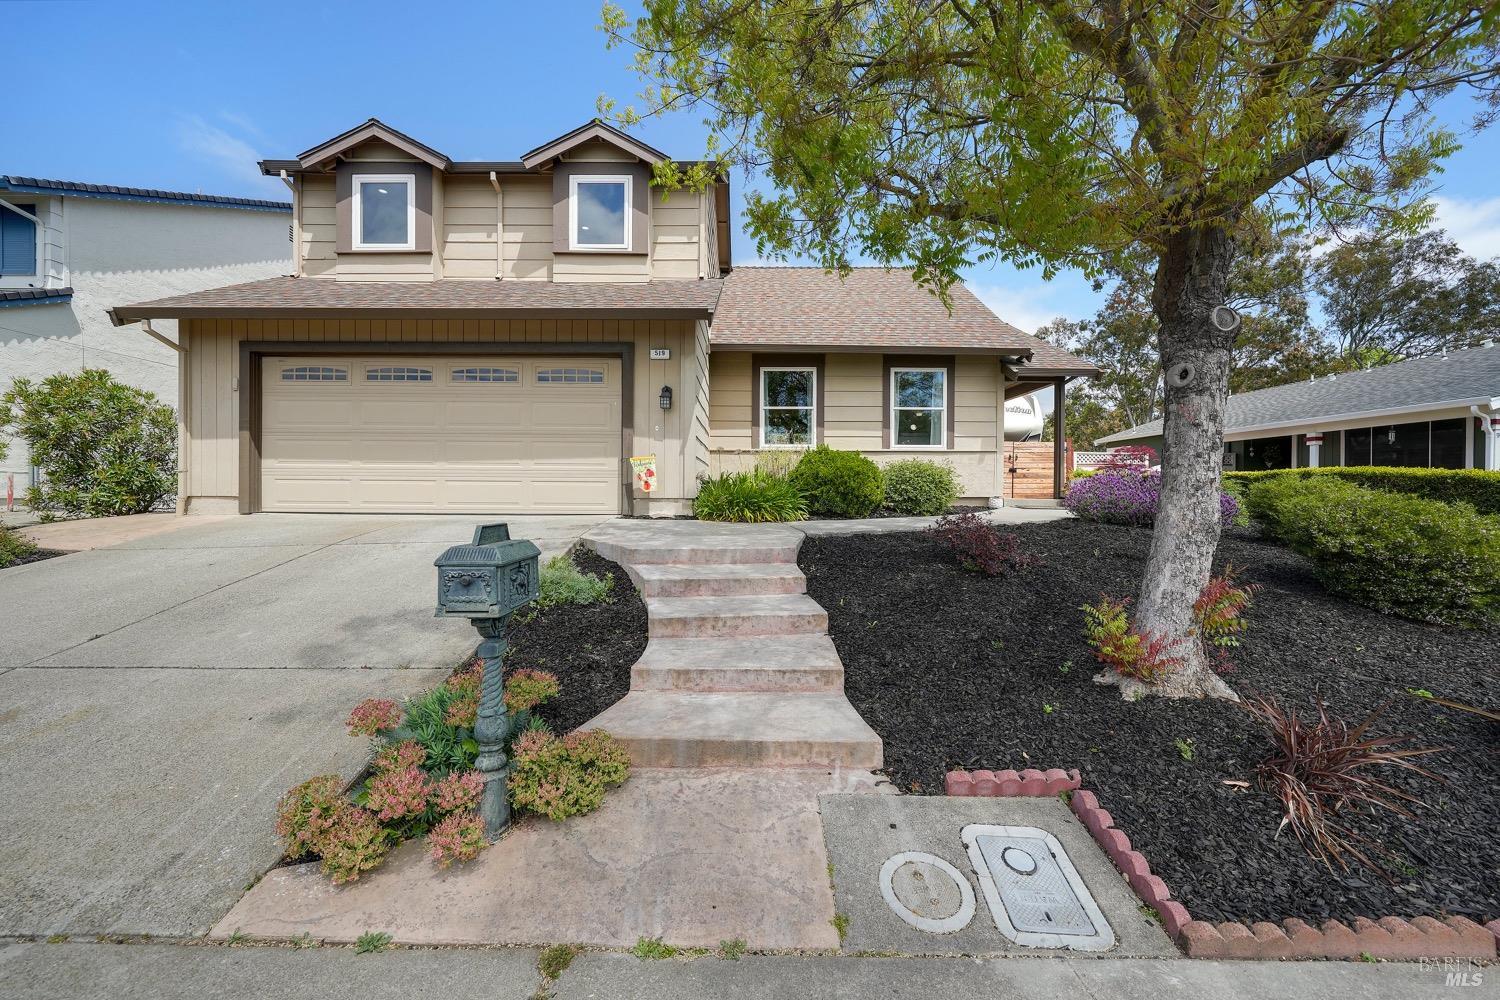 Welcome to this stunning 4 Bedroom, 3 Bath home located in Benicia.   This property features vaulted